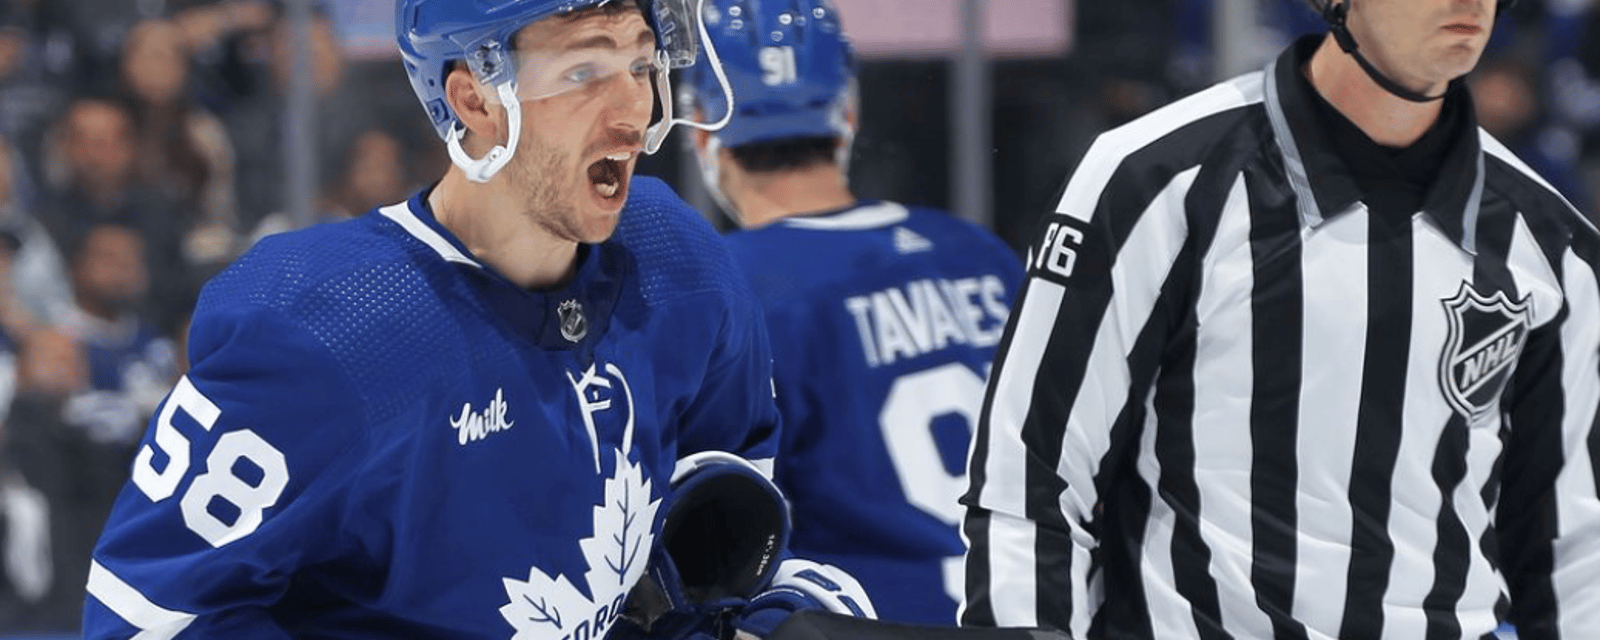 Maple Leafs may make lineup switch for Game 6 